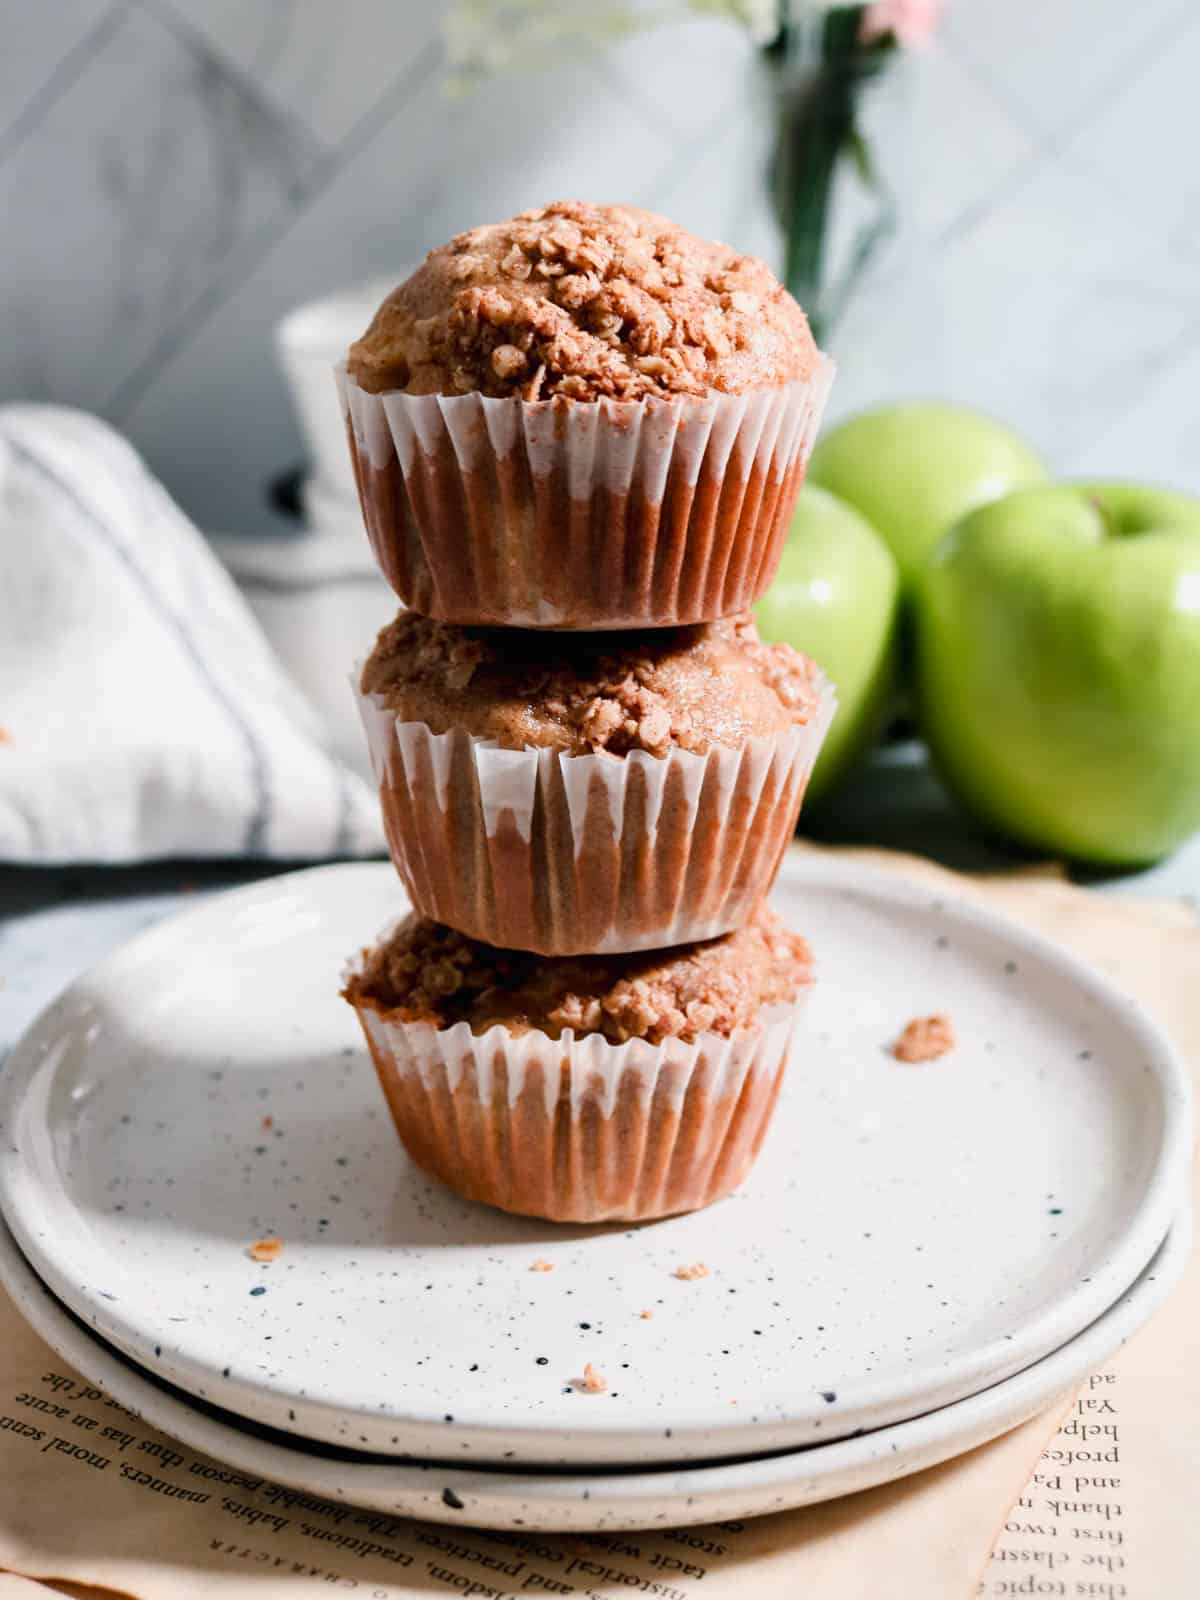 Stack of three apple sourdough muffins on a plate.